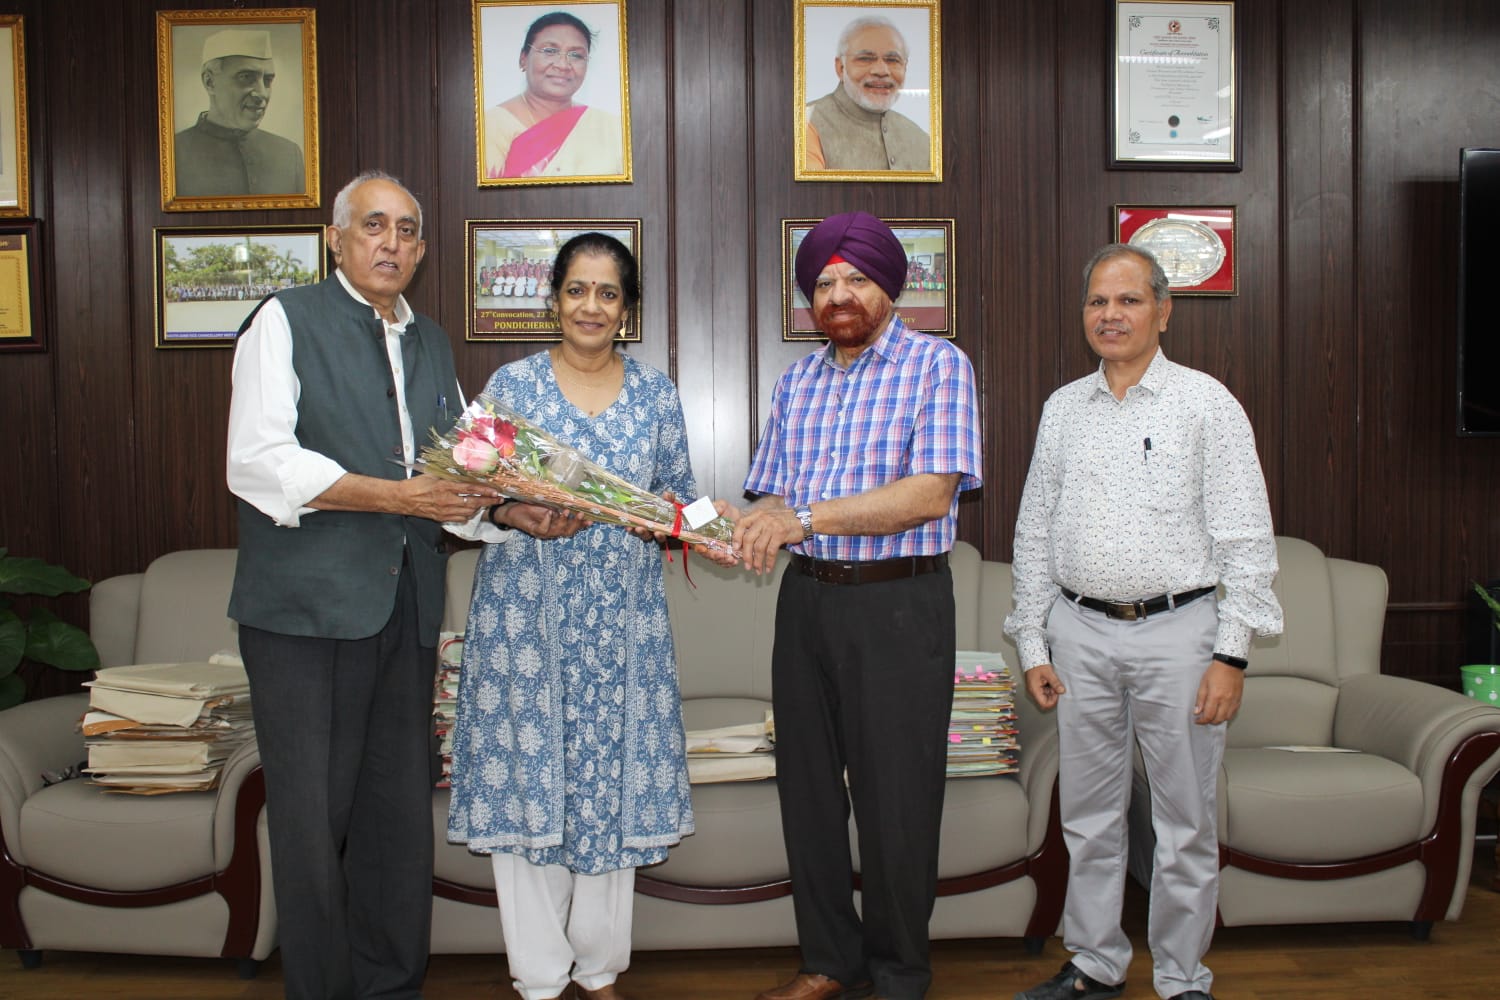 Prof. (Dr.) Virander S. Chauhan (Rhodes Scholar), Former Chairman of UGC and NAAC, met Vice-Chancellor Prof. Gurmeet Singh, at his office during his visit to Pondicherry University on 05.03.2023, for delivering lecture on “Social Responsibility of Science and Higher Education”